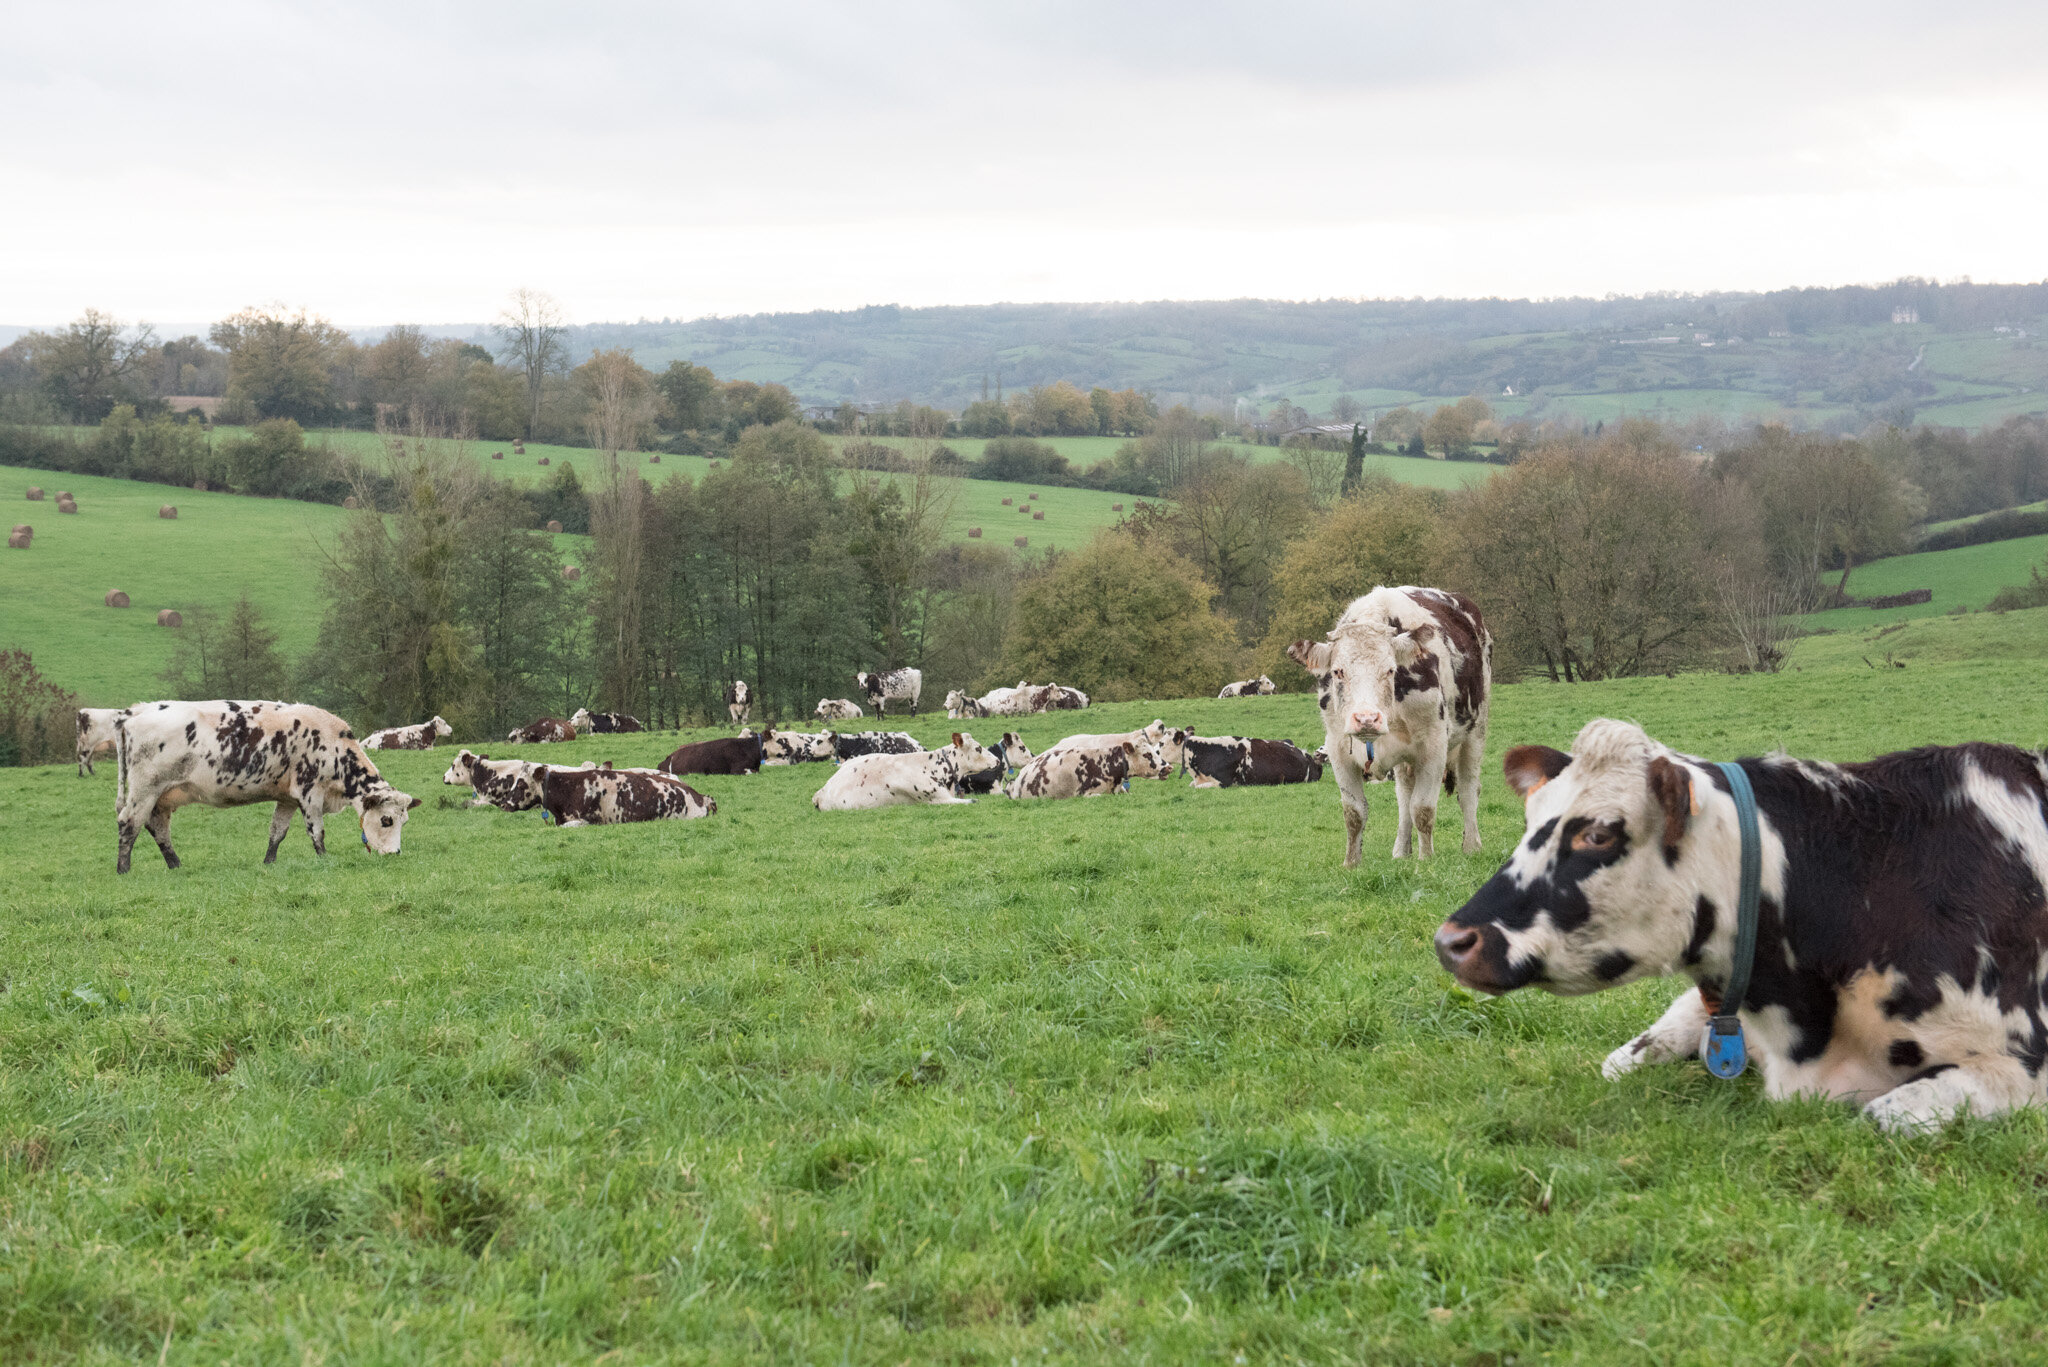    Graindorge cheese for 'Culture' U.S.    Cows relaxing in fields near Livarot 